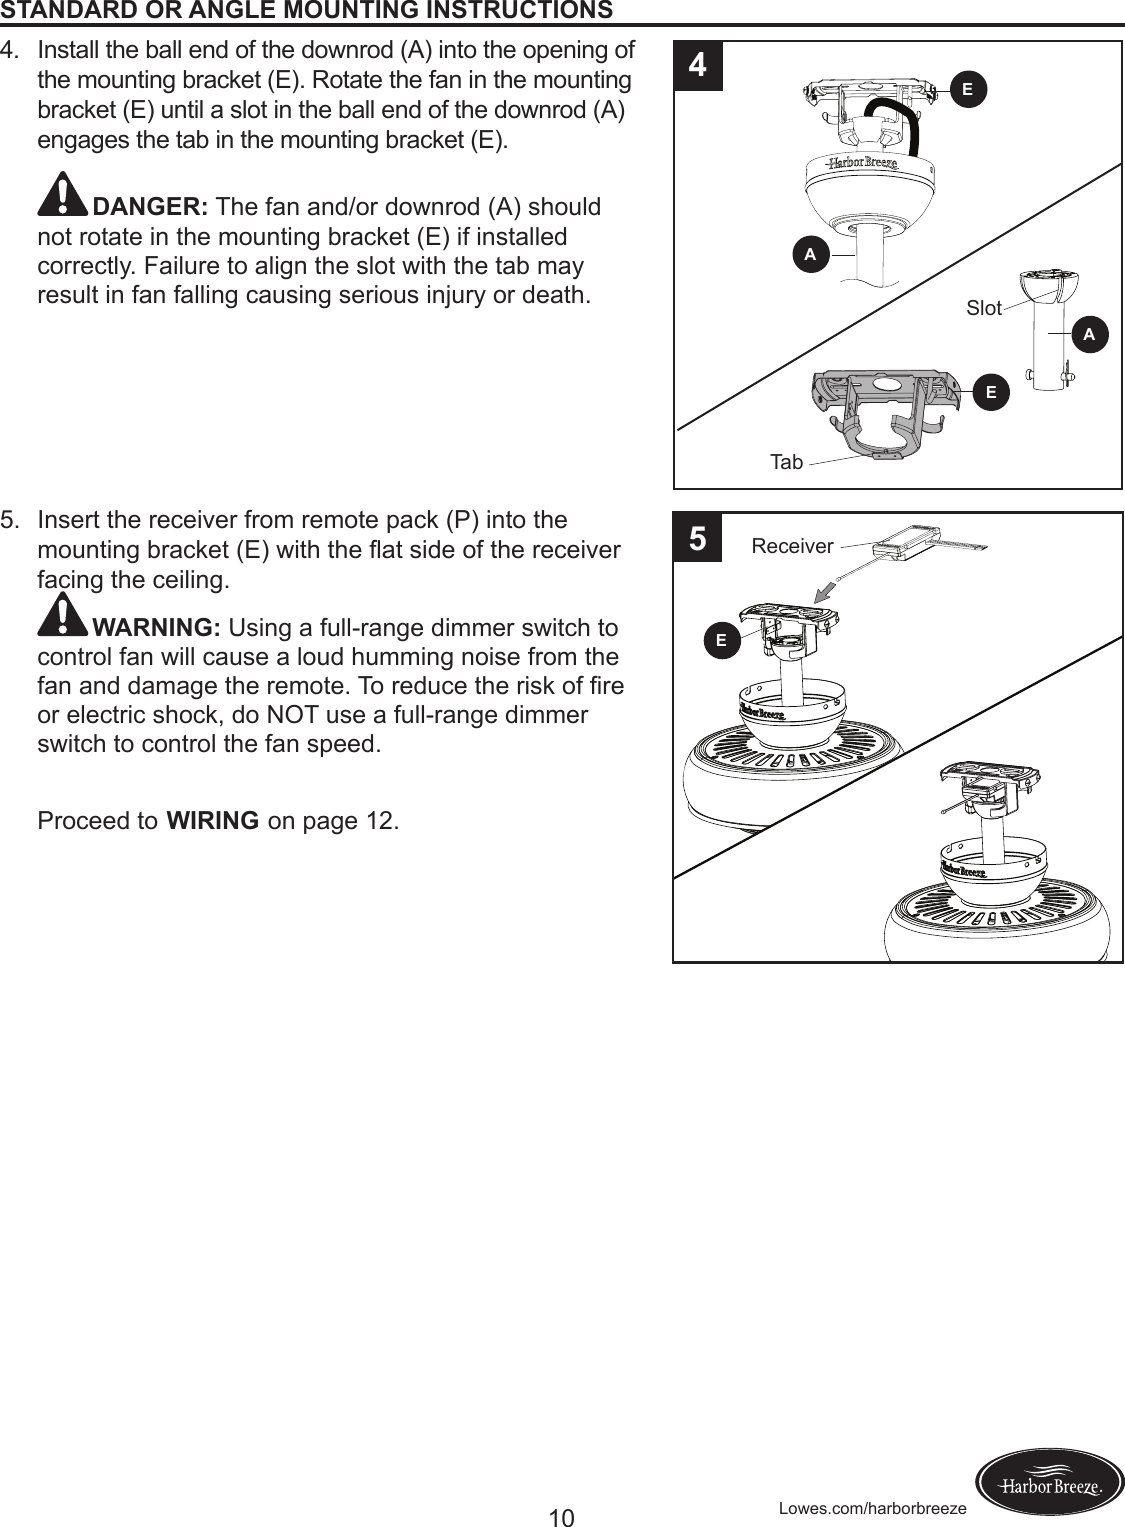 10 Lowes.com/harborbreezeSTANDARD OR ANGLE MOUNTING INSTRUCTIONS4.  Install the ball end of the downrod (A) into the opening of the mounting bracket (E). Rotate the fan in the mounting bracket (E) until a slot in the ball end of the downrod (A) engages the tab in the mounting bracket (E).  DANGER: The fan and/or downrod (A) should not rotate in the mounting bracket (E) if installed correctly. Failure to align the slot with the tab may result in fan falling causing serious injury or death. 5.  Insert the receiver from remote pack (P) into the mountingbracket(E)withtheatsideofthereceiverfacing the ceiling.WARNING: Using a full-range dimmer switch to control fan will cause a loud humming noise from the fananddamagetheremote.Toreducetheriskofreor electric shock, do NOT use a full-range dimmer switch to control the fan speed.Proceed to WIRING on page 12.4AAEETabSlotE5Receiver